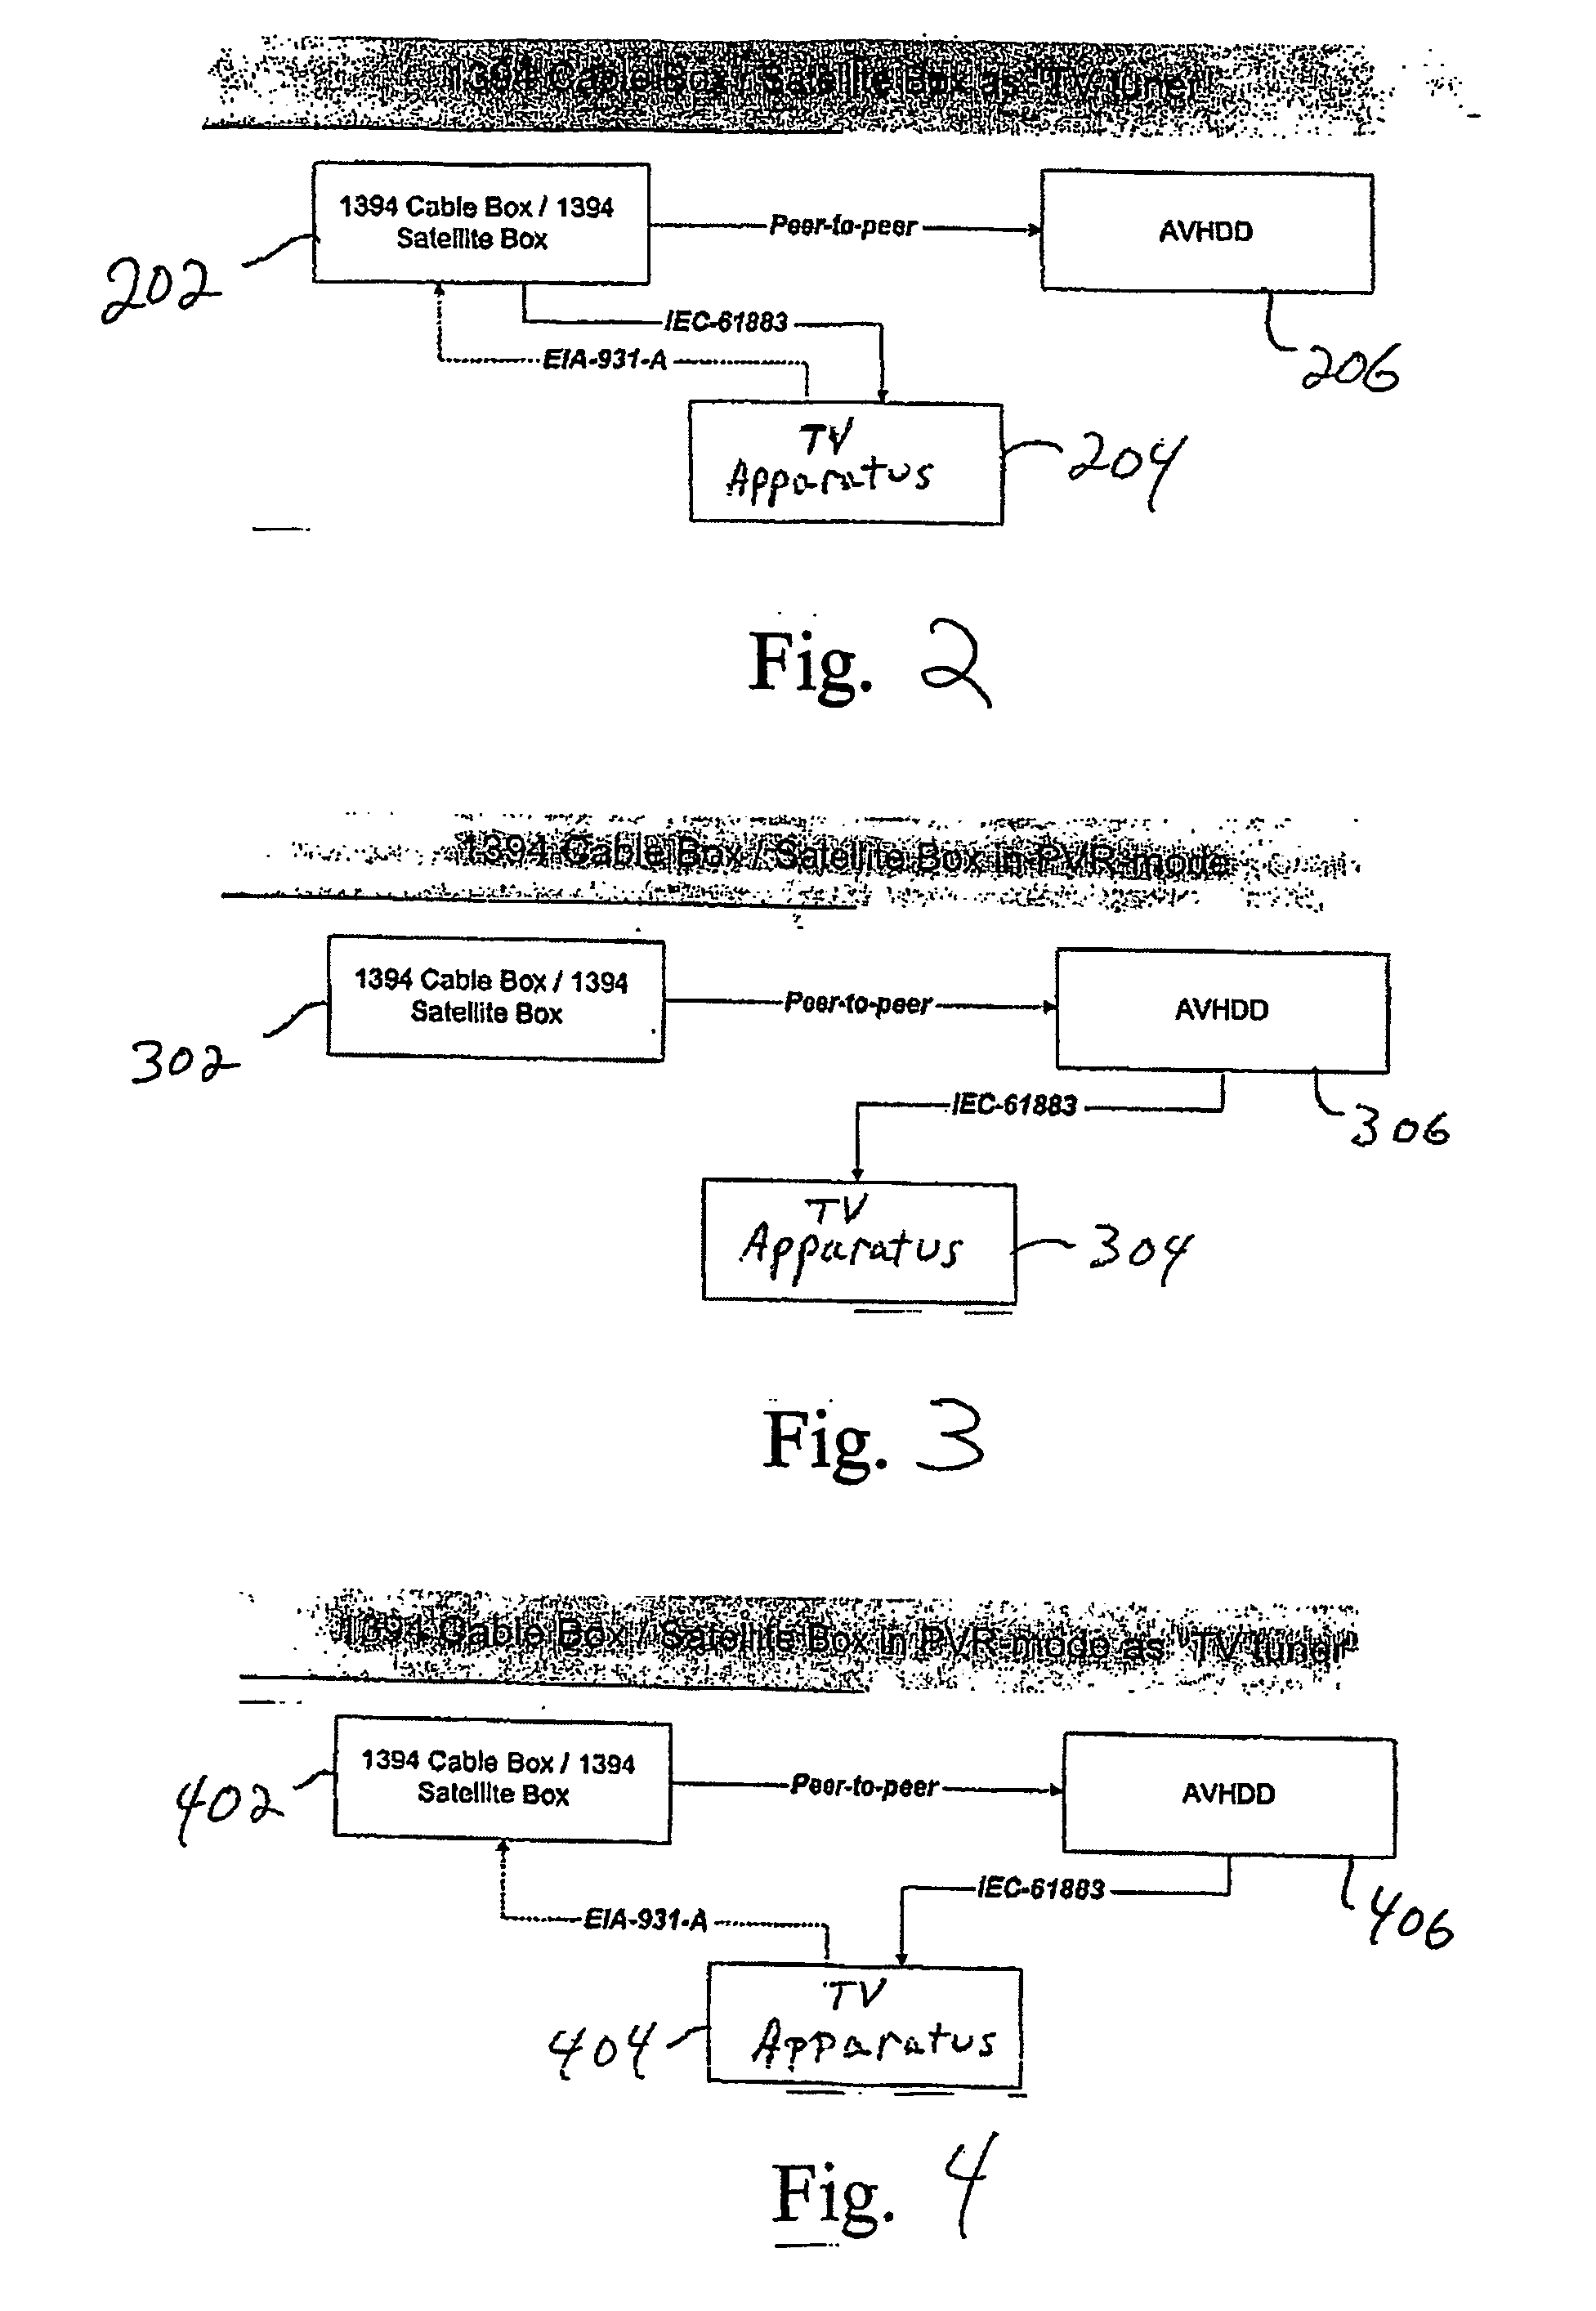 Method and apparatus for providing simplified peer-to-peer recording